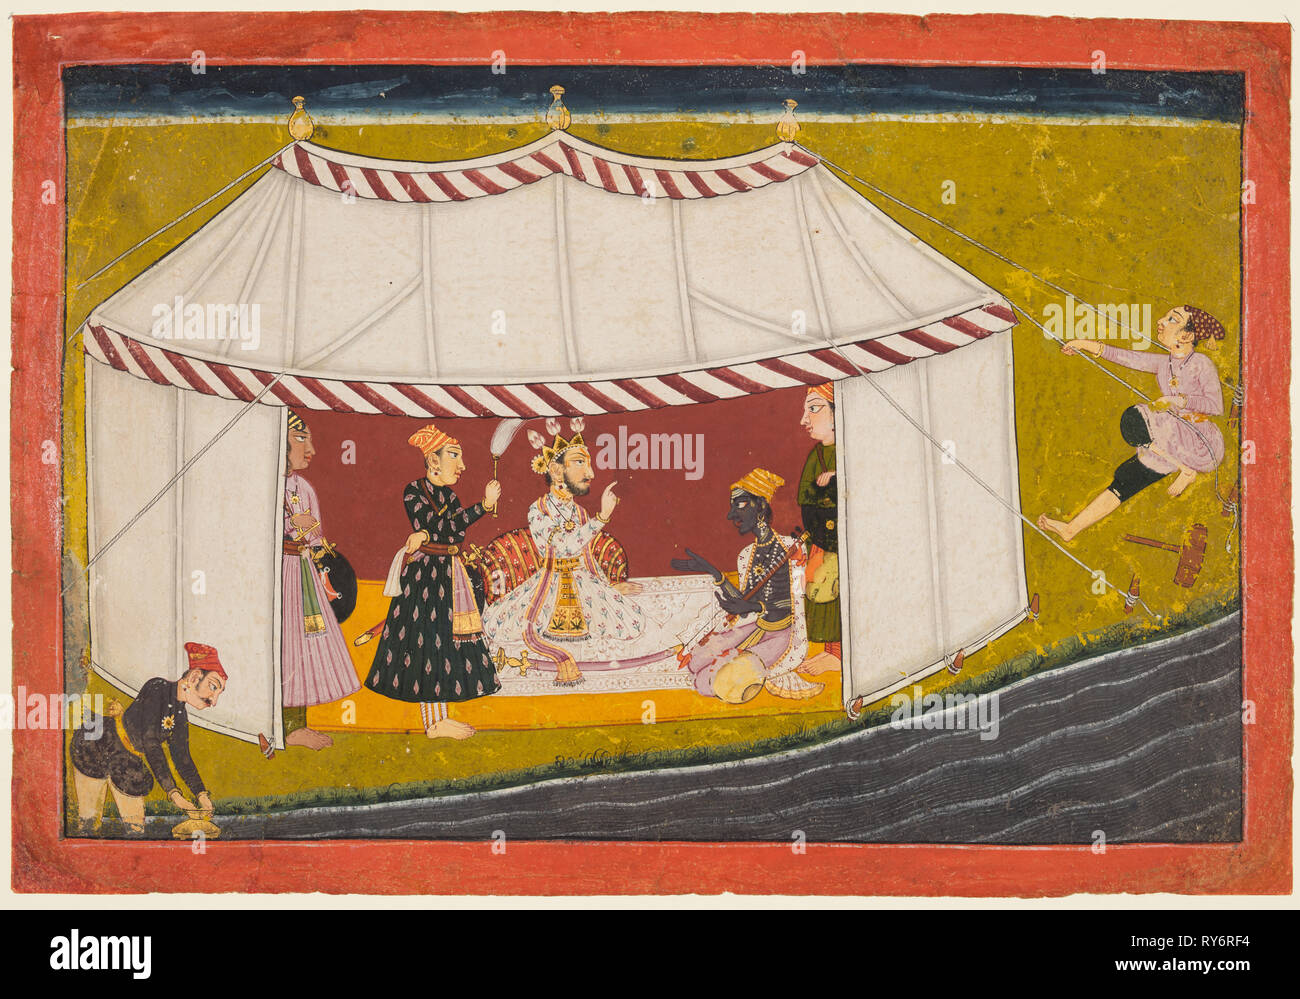 Madhava in a tent before a ruler, from a Madhavanala Kamakandala series, c. 1700. India, Bilaspur. Color on paper; page: 21.6 x 30.8 cm (8 1/2 x 12 1/8 in Stock Photo